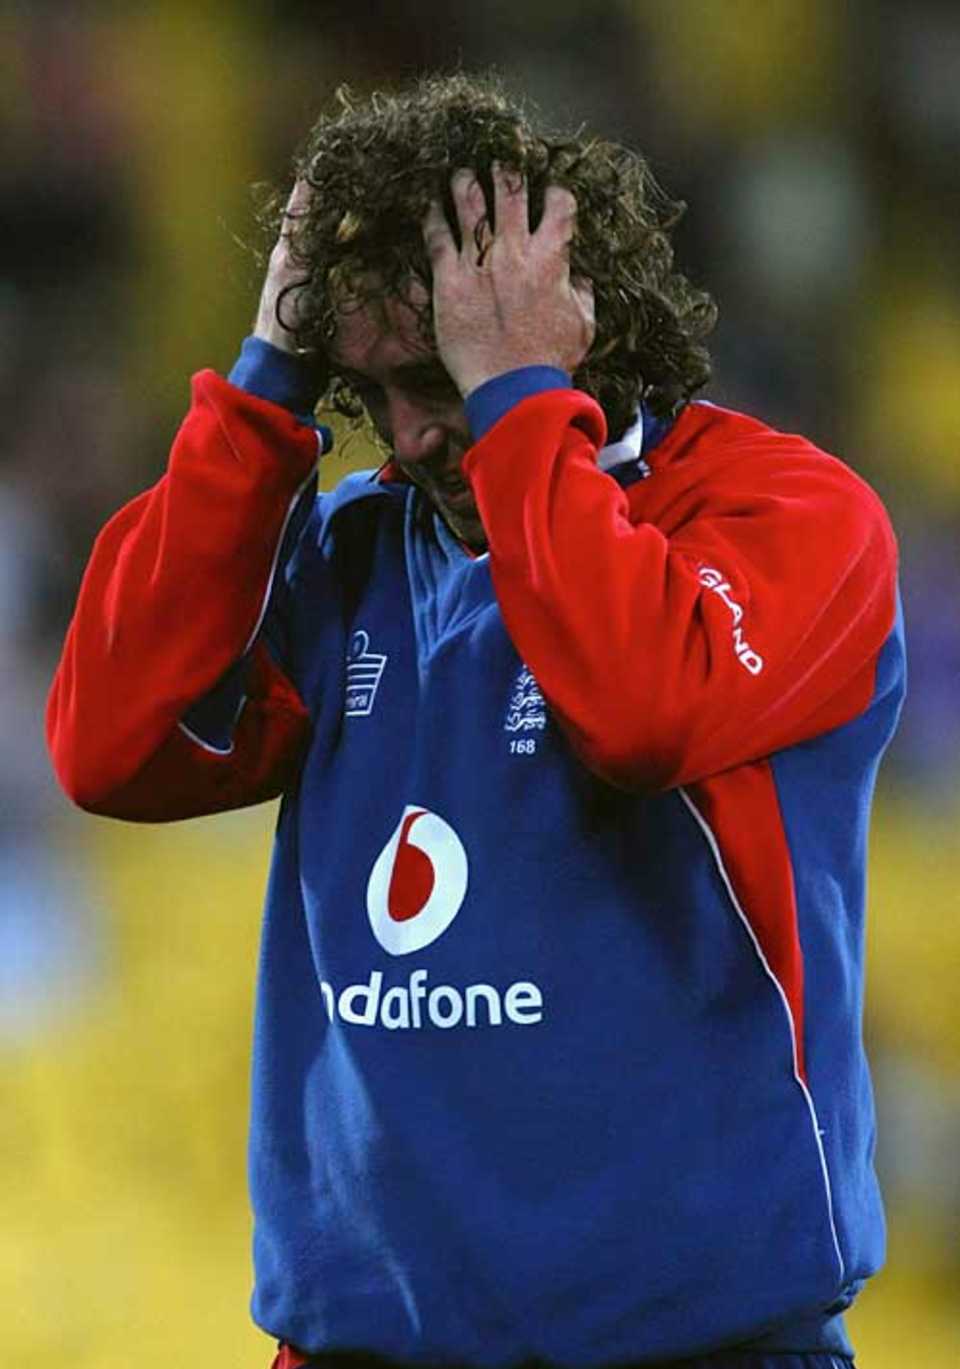 Pulling his out: Ryan Sidebottom shows his frustration, New Zealand v England, 1st ODI, Wellington, February 9, 2008